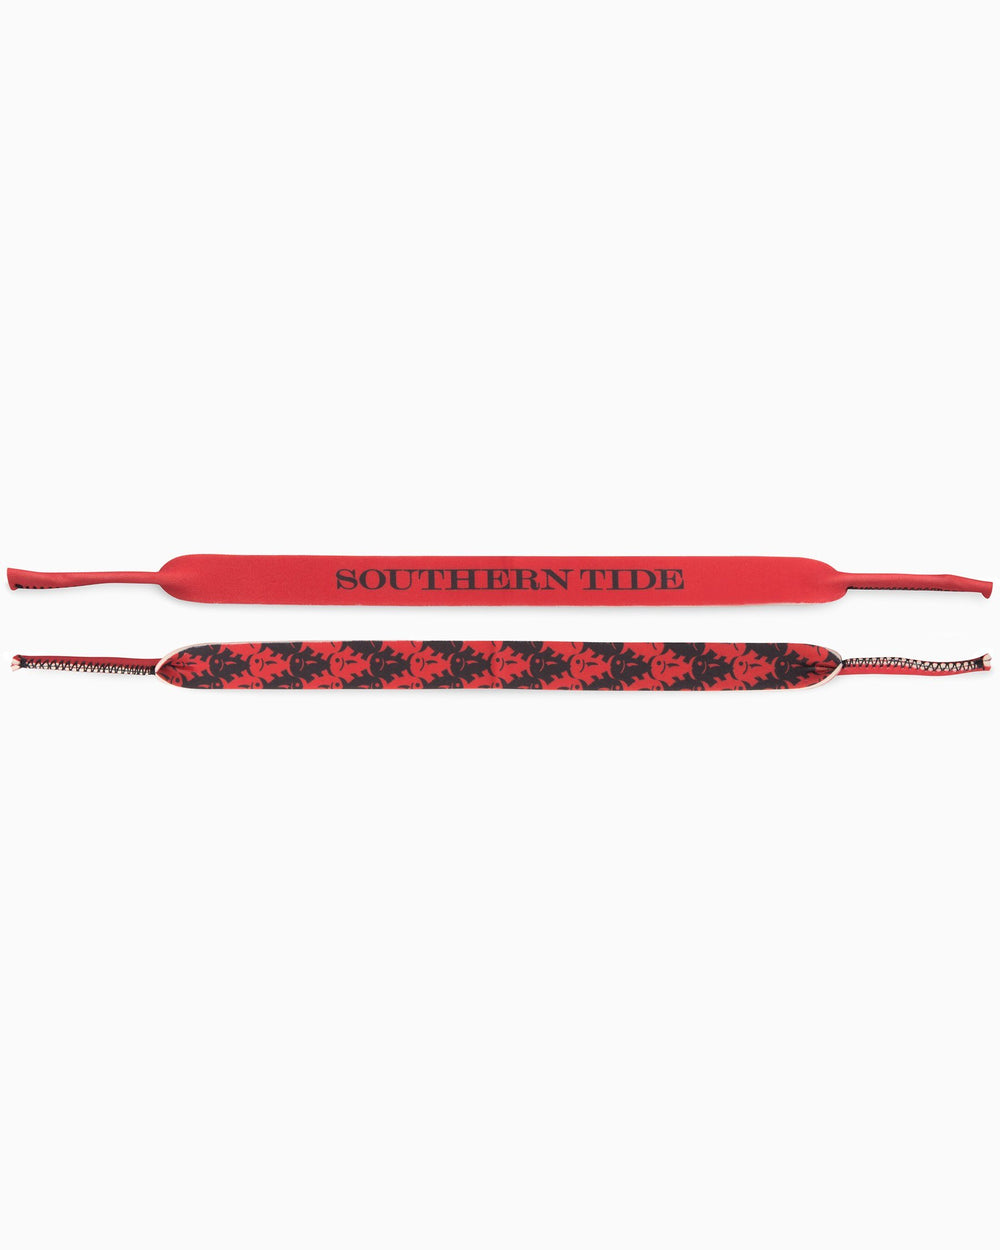 The front view of the Gameday Skipjack Sunglass Straps by Southern Tide - Varsity Red and Black